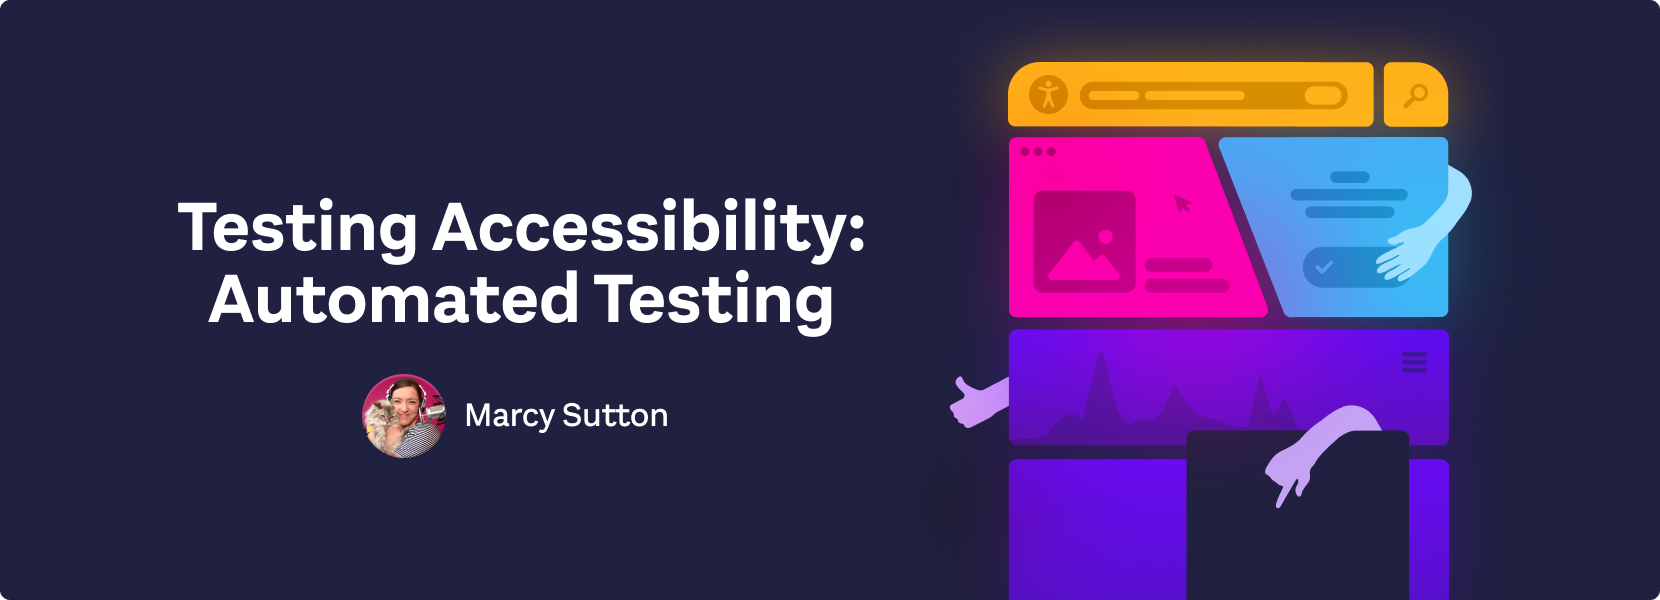 Testing Accessibility: Automated Testing by Marcy Sutton